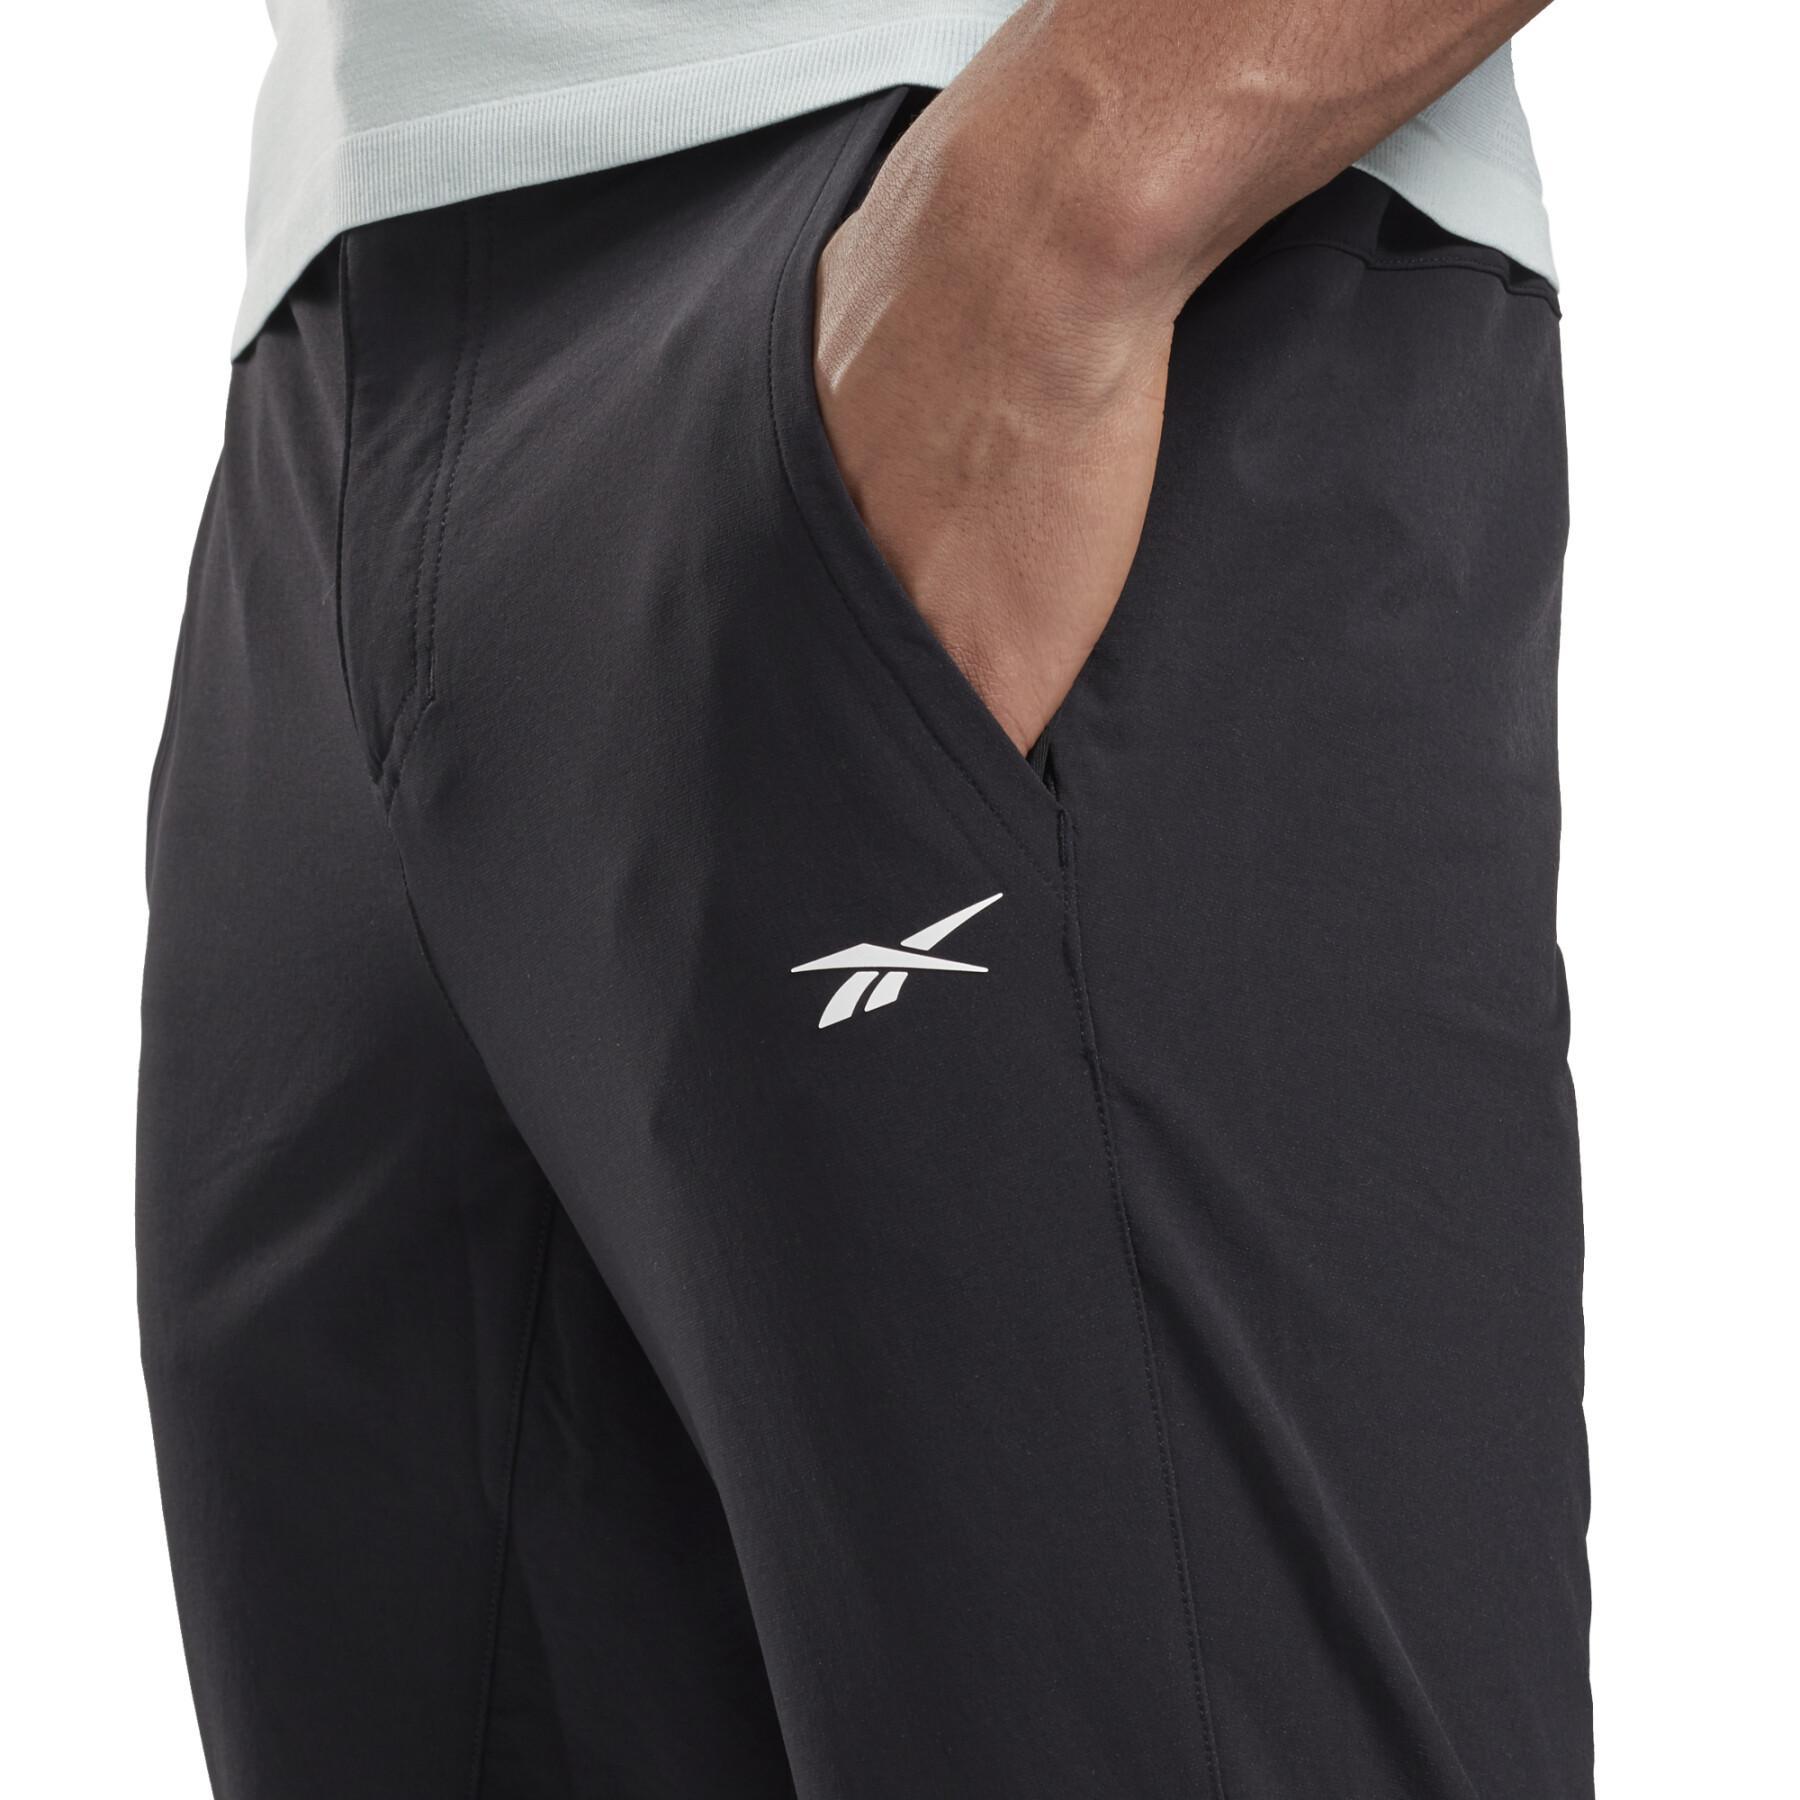 Joggers Reebok United By Fitness Athlete